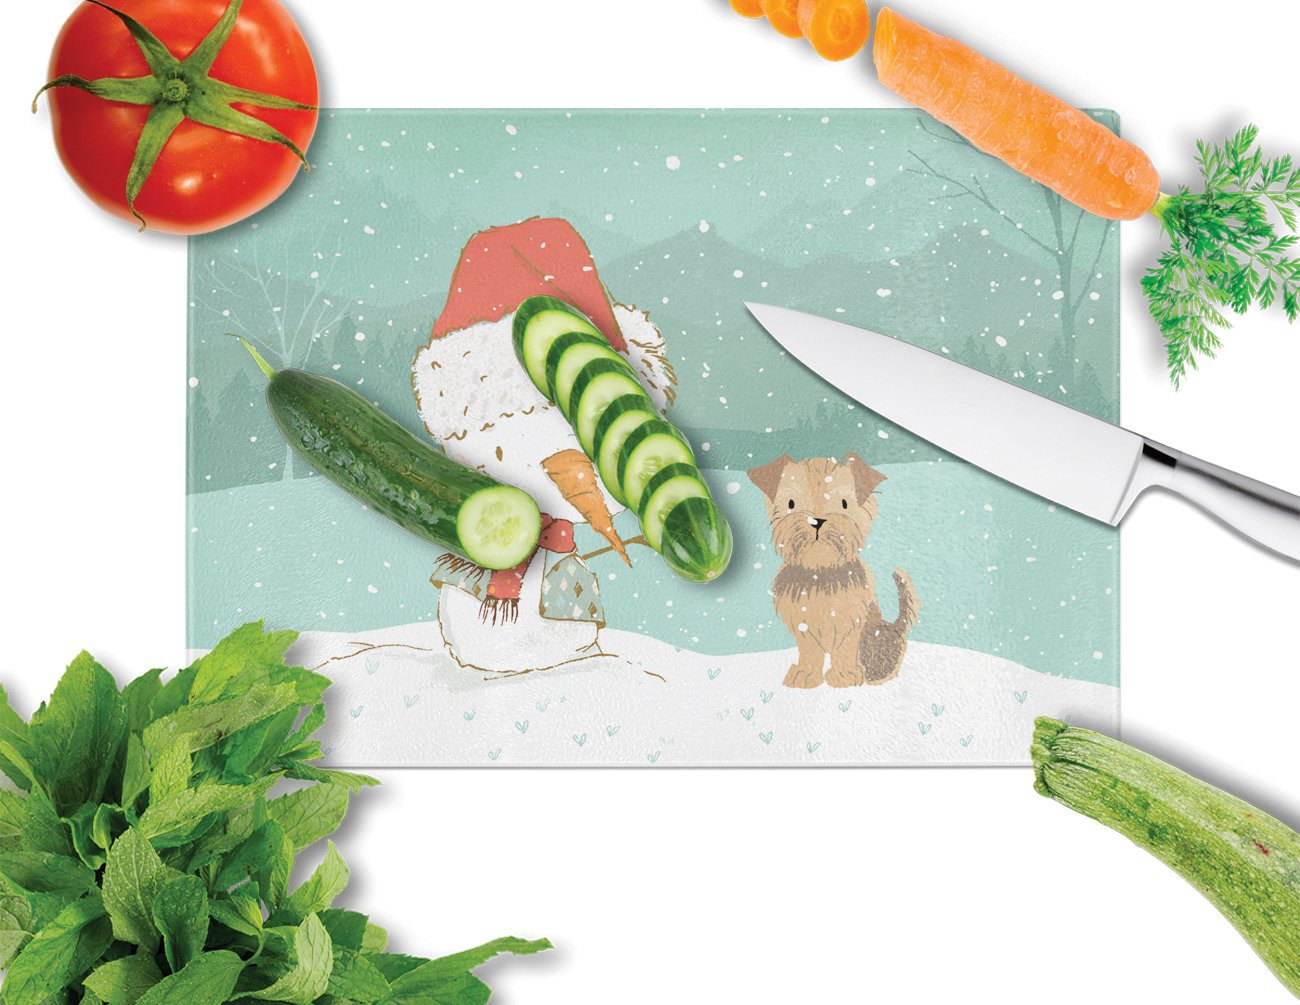 Yorkie Natural Ears Snowman Christmas Glass Cutting Board Large CK2099LCB by Caroline's Treasures